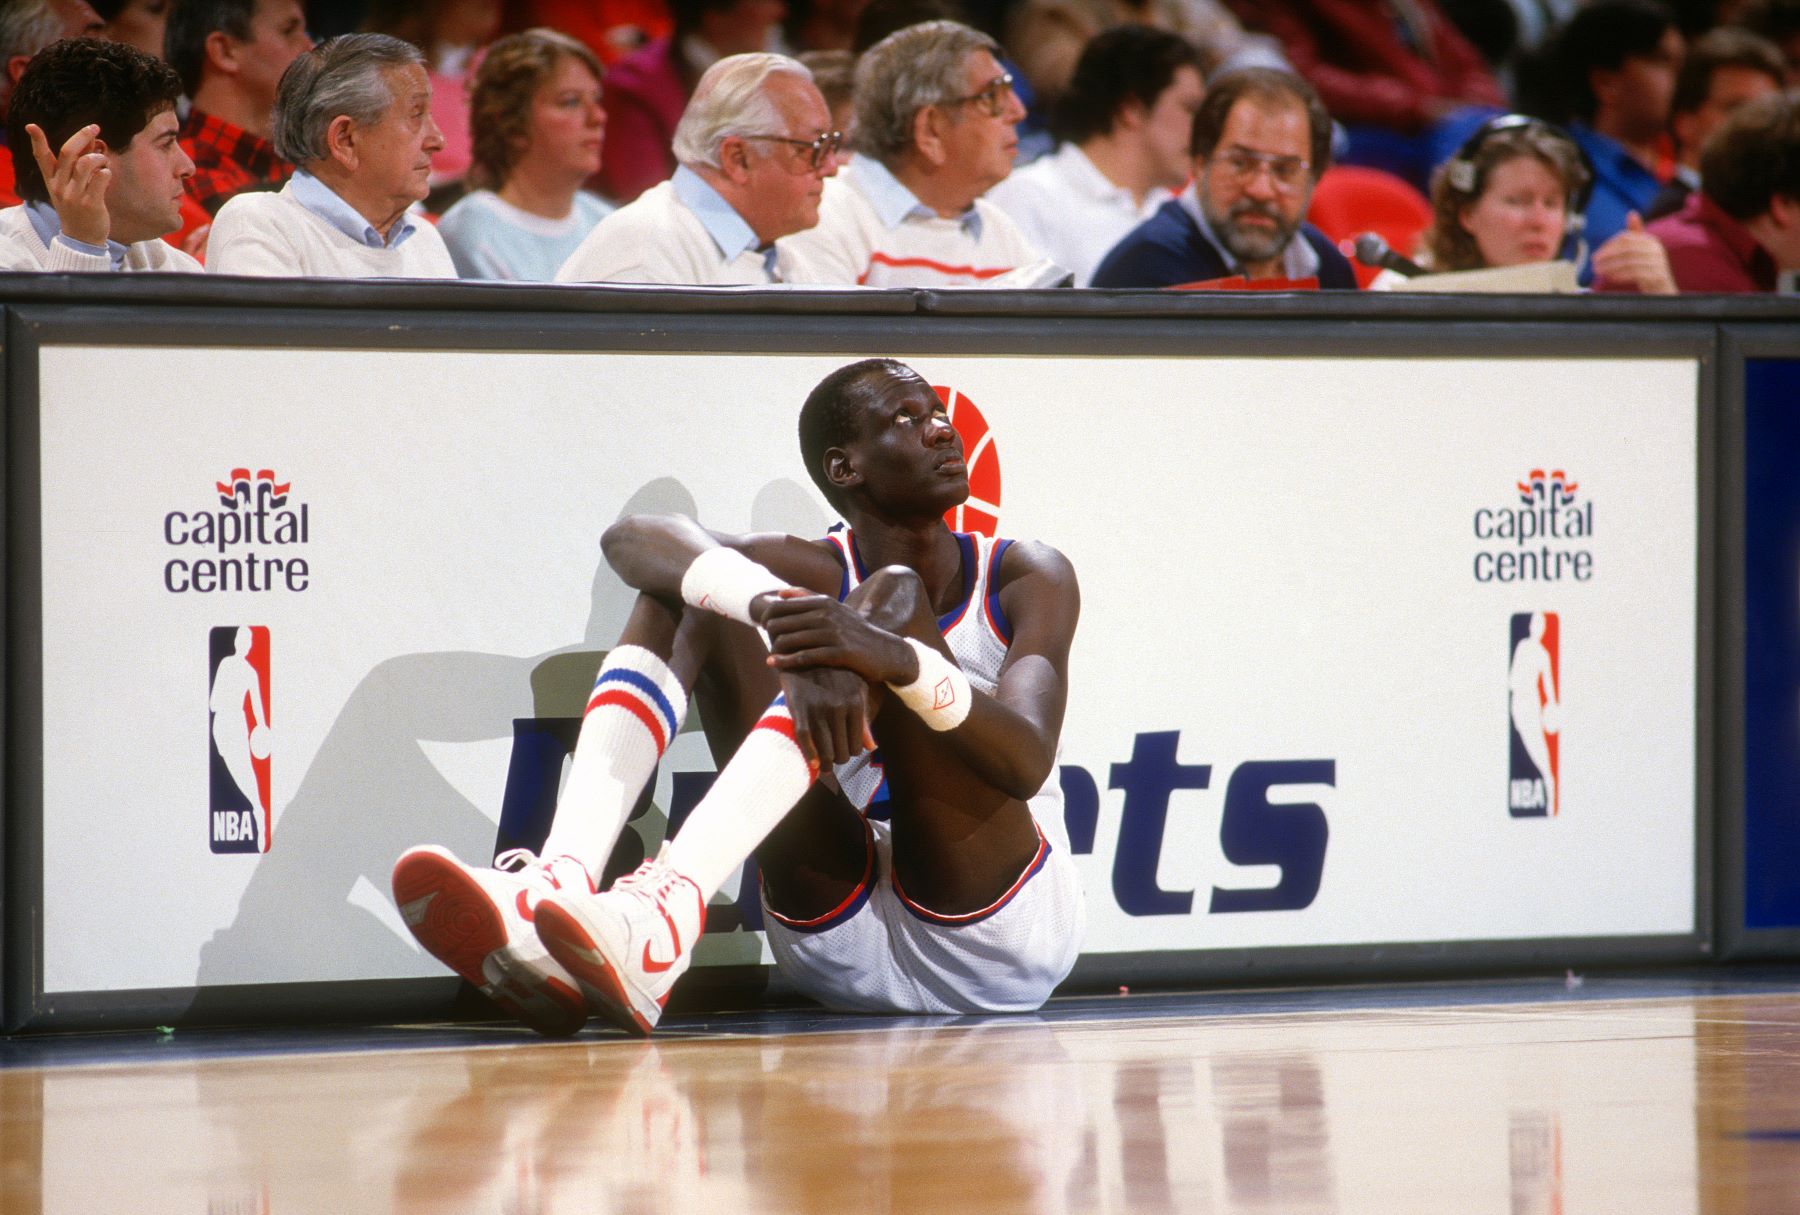 Manute Bol #10 of the Washington Bullets NBA during a game at the Capital Centre in Landover, Maryland